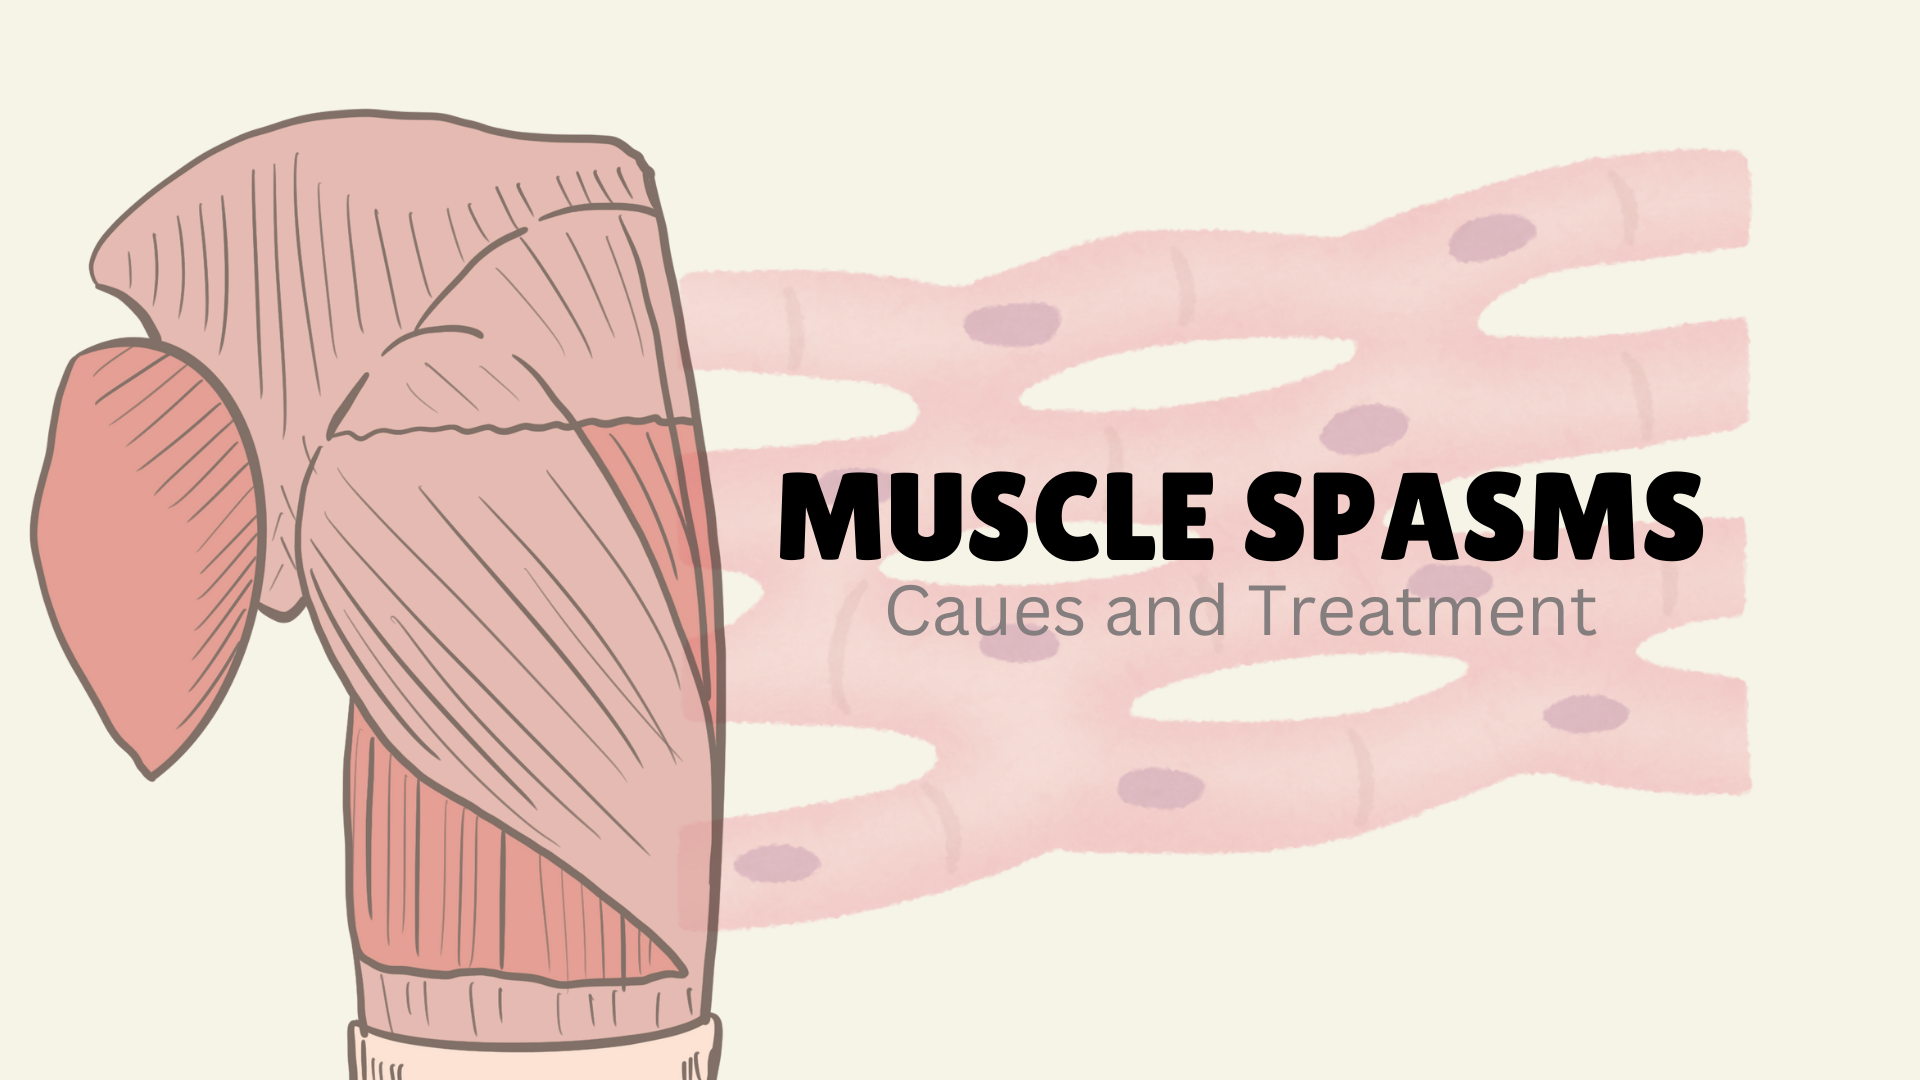 How-to-Get-Rid-of-Muscle-Spasms-Causes-Diazepam-Treatment-for-Legs-Back-Chest-Shoulder